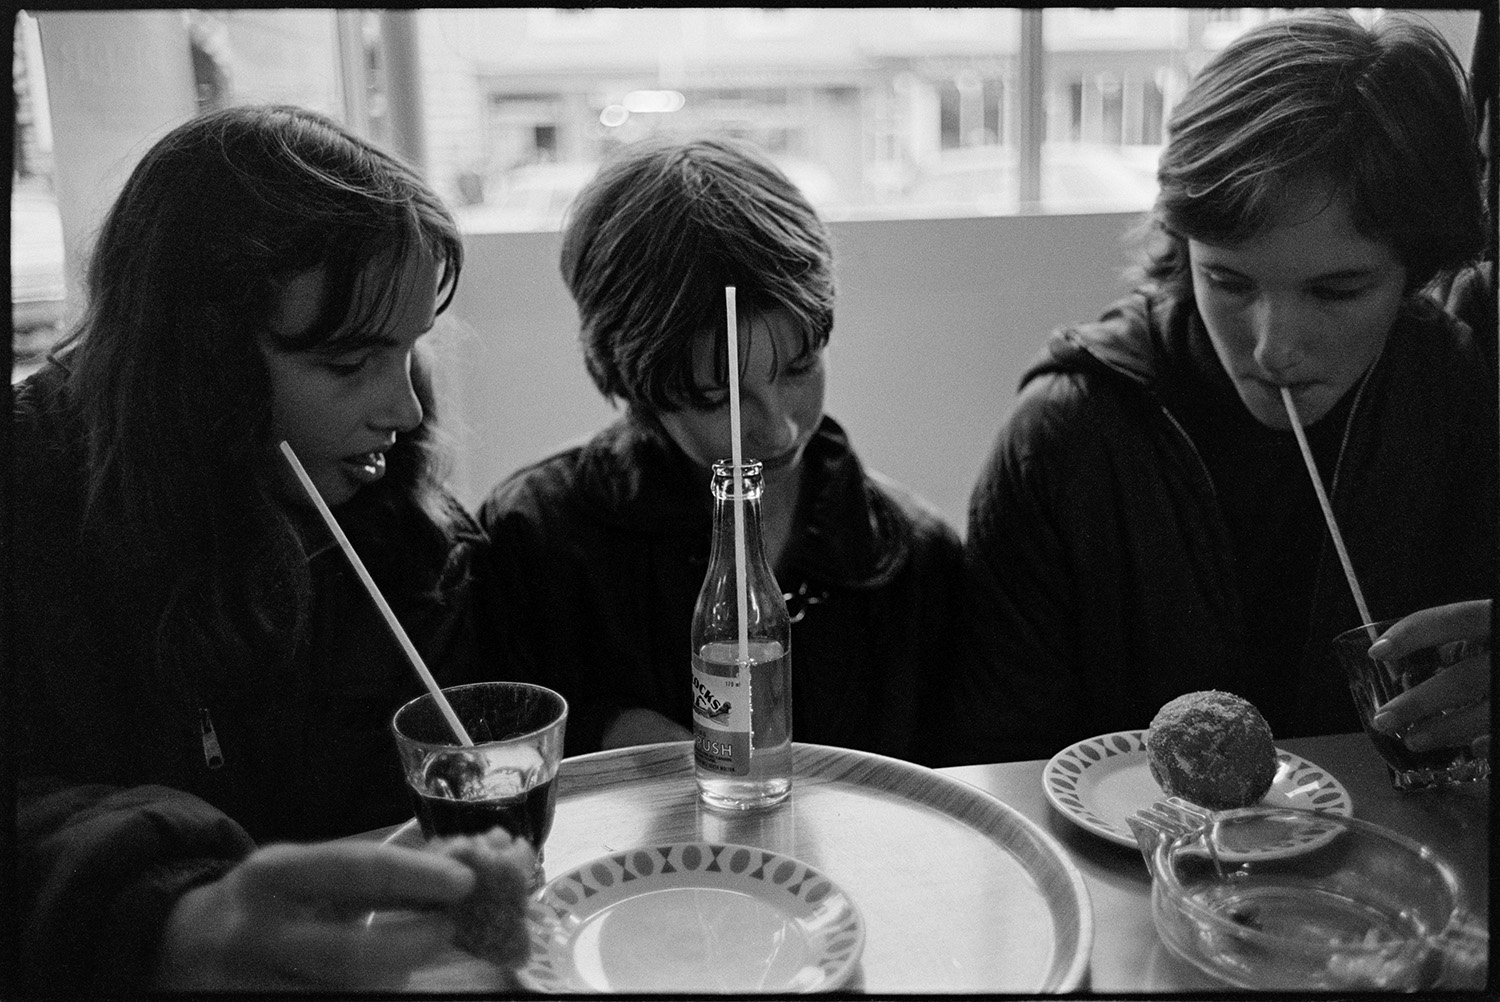 Three teenagers in a café eating doughnuts and drinking  drinks with straws.